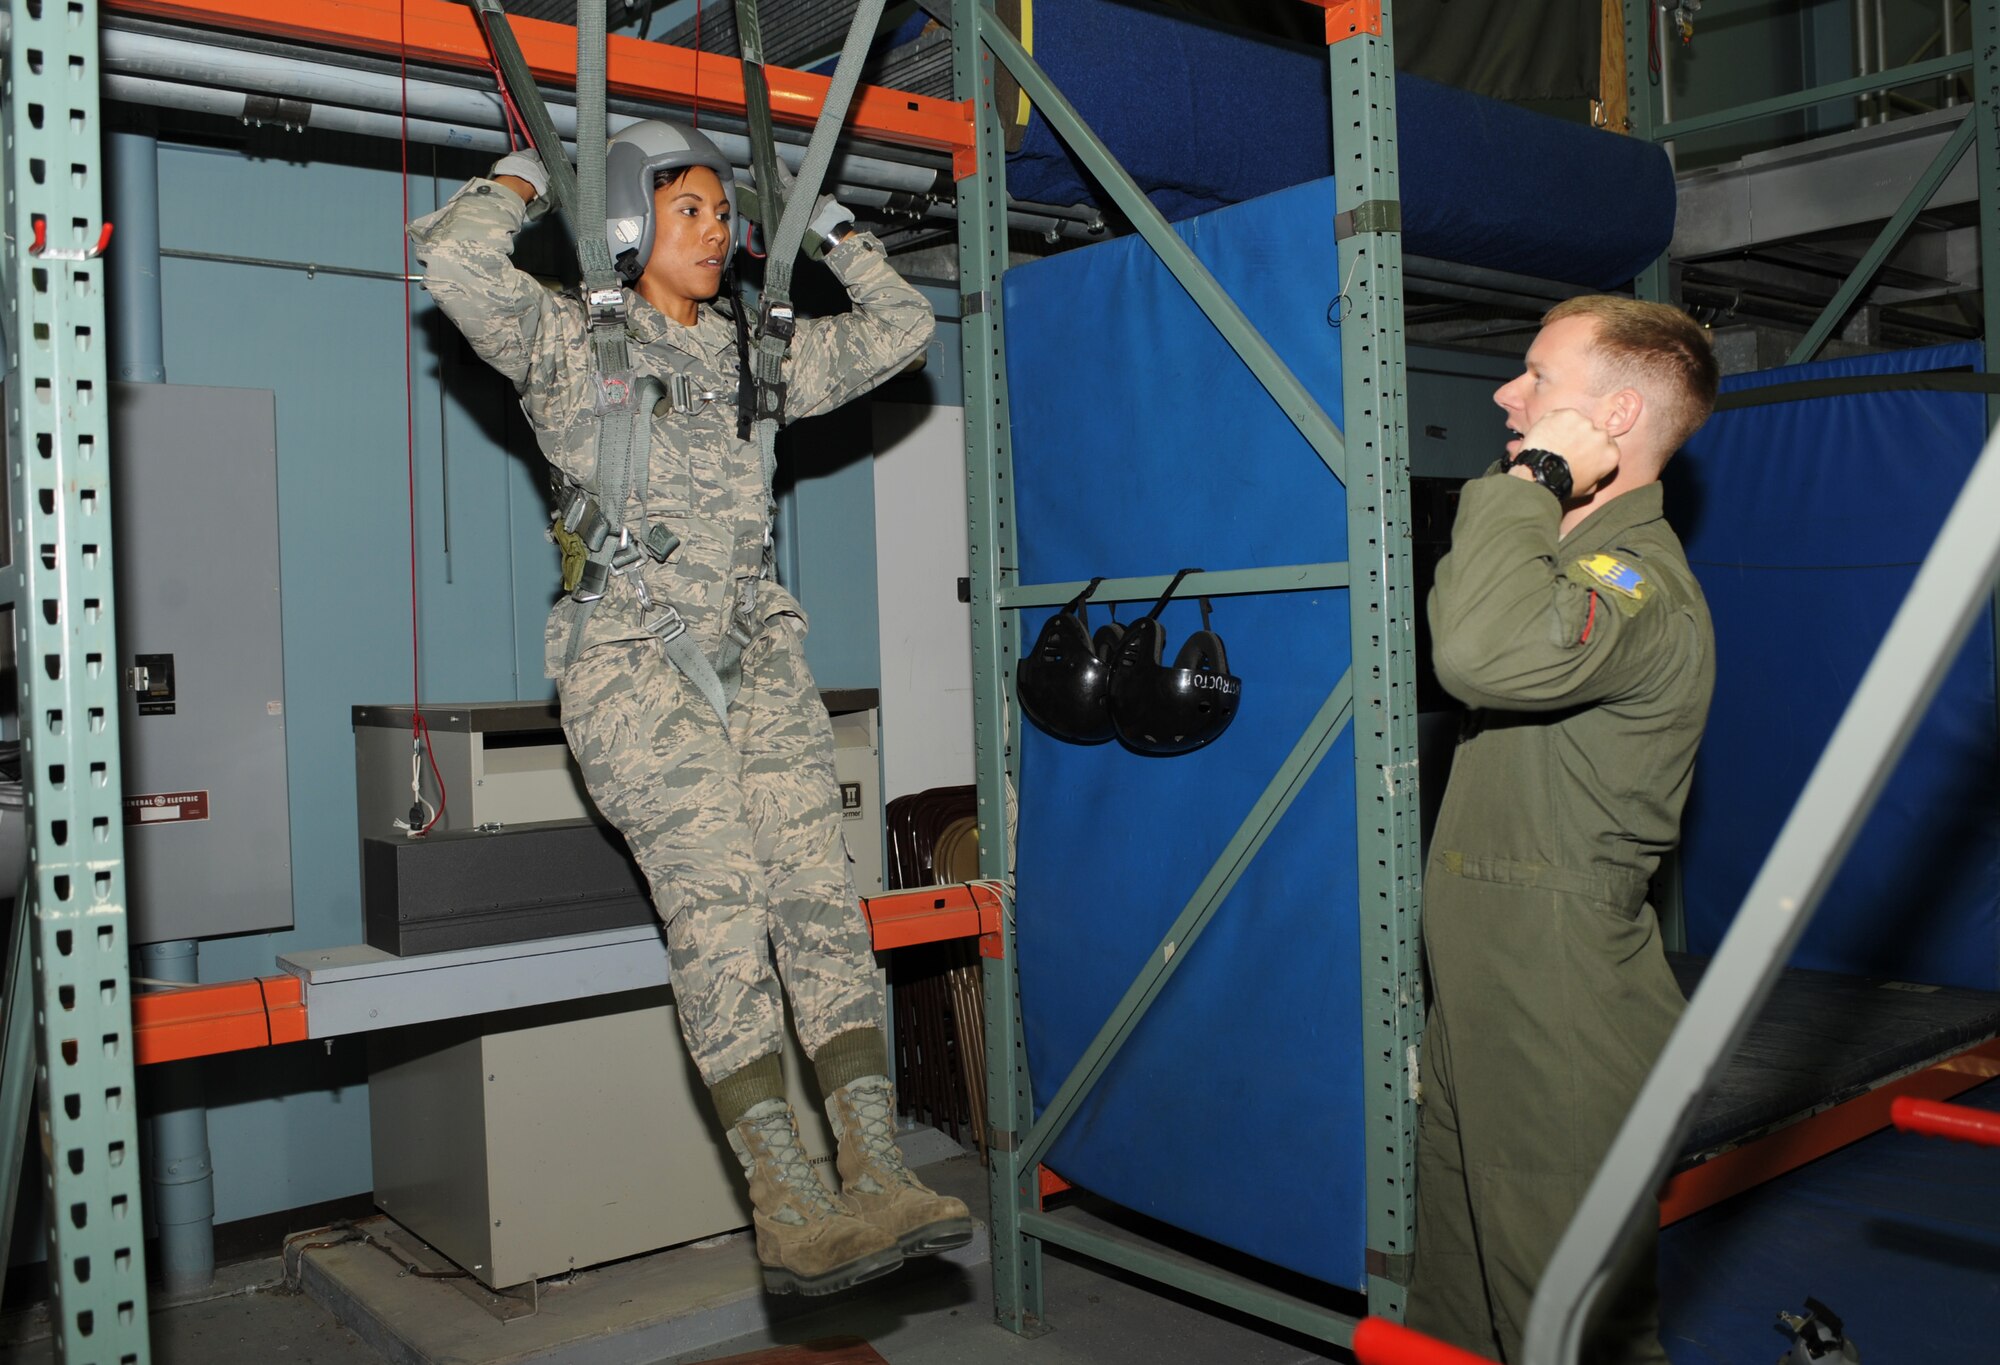 Chief Master Sgt. Sonia Lee, the command chief with the 28th Bomb Wing, practices different parachute steering methods as part of pre- flight training with 1st Lt. Matthew Herbstreth, 34th Bomb Squadron pilot, at Ellsworth Air Force Base, S.D., July 13, 2016. Lee learned how to identify different types of parachute malfunctions, how to fix them, and how to properly land after a fall. (U.S. Air Force photo by Airman 1st Class Denise M. Nevins)  